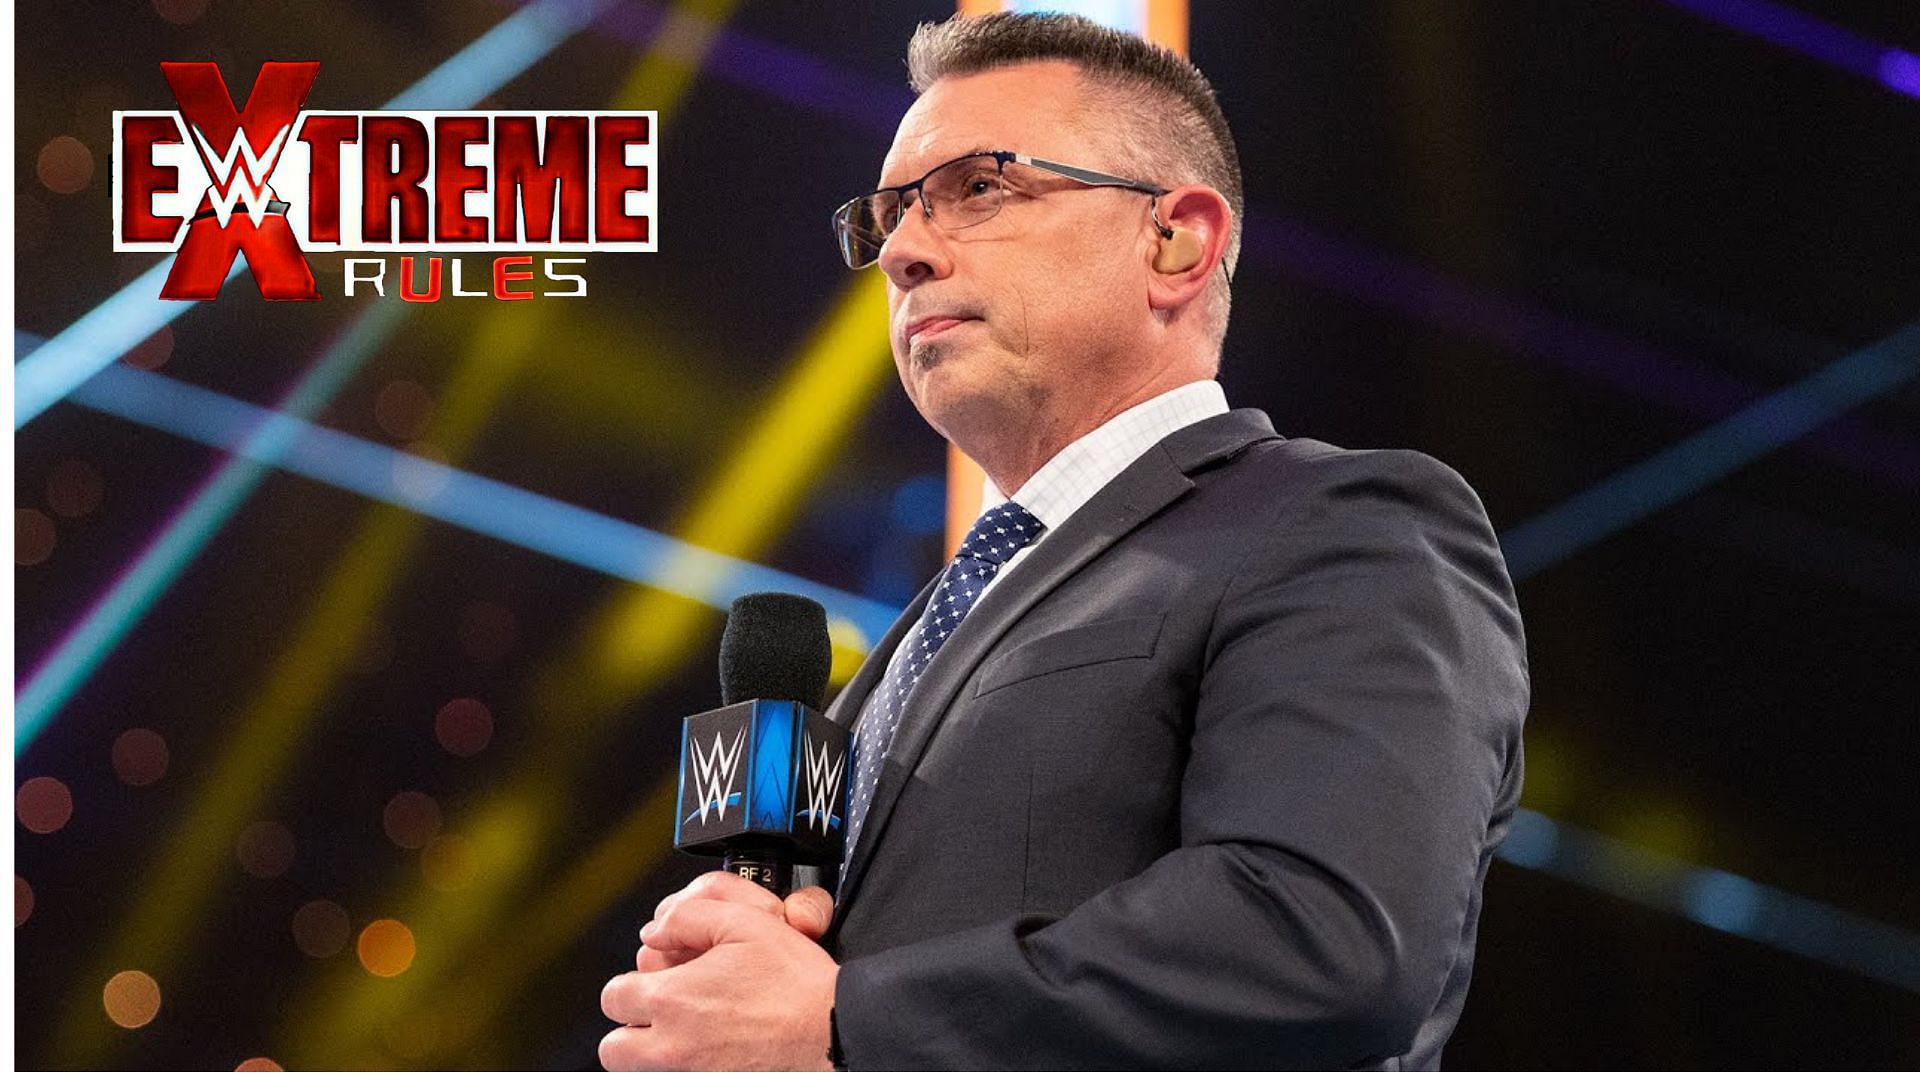 Michael Cole has been dropping names left and right on Extreme Rules!